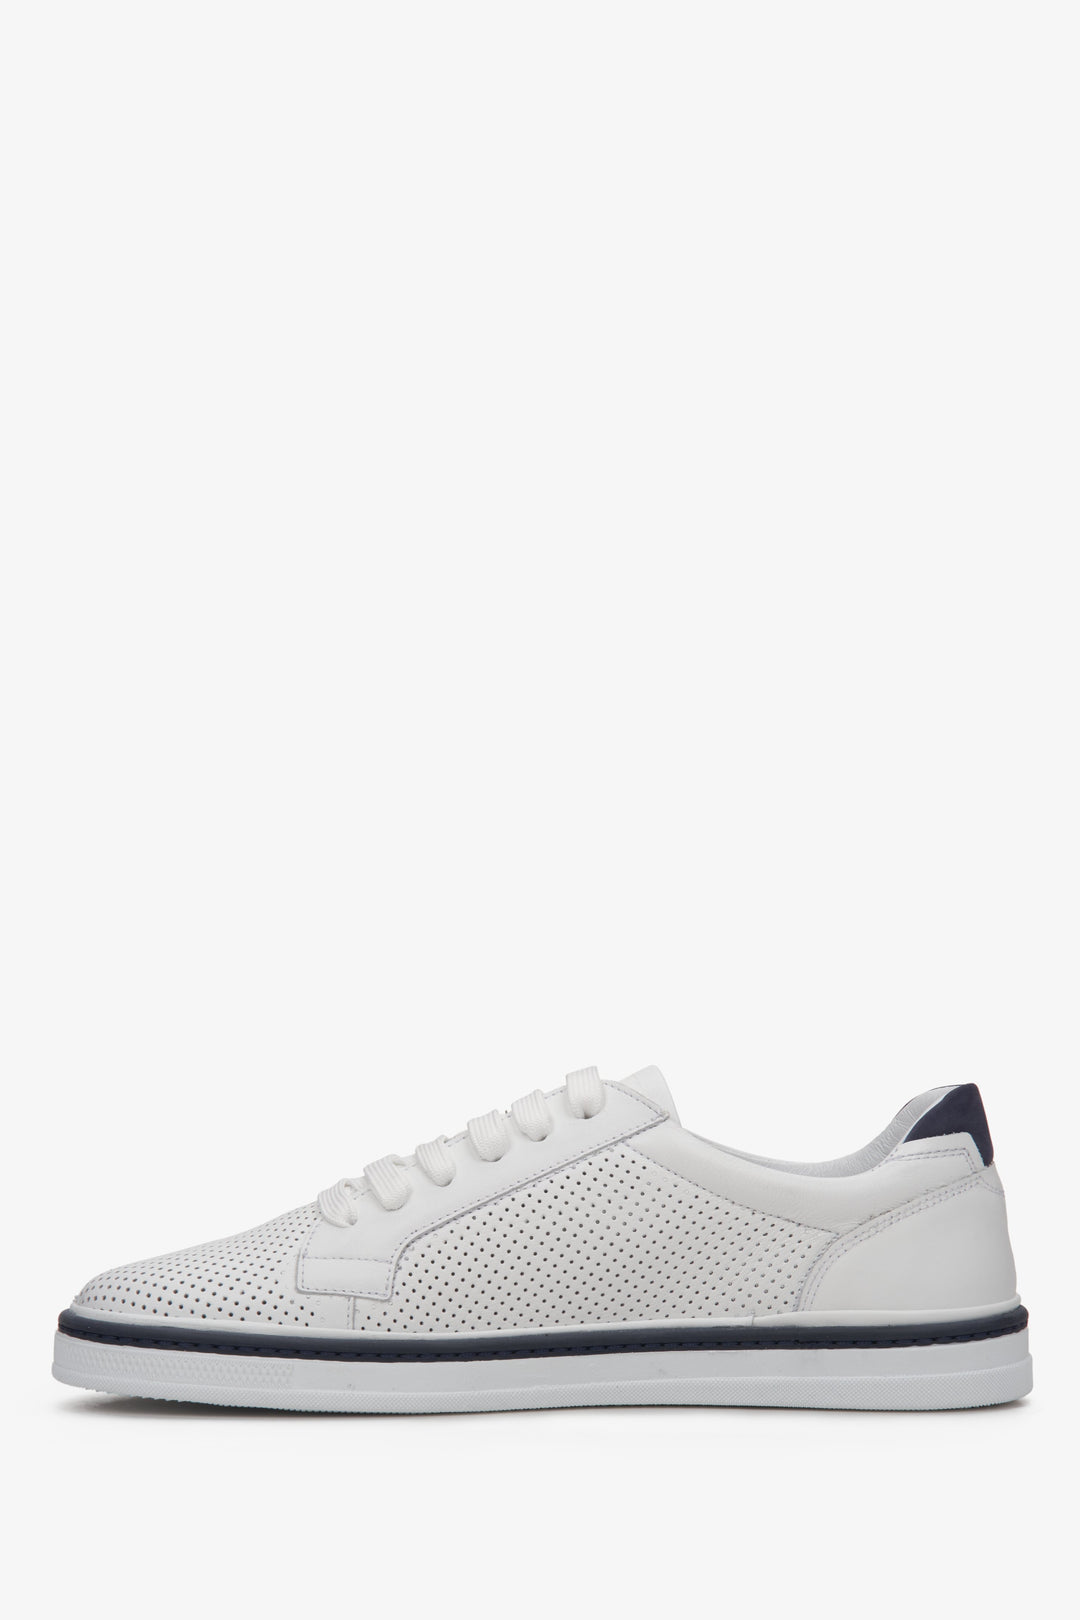 White men's perforated sneakers for summer of Estro's new summer collection.